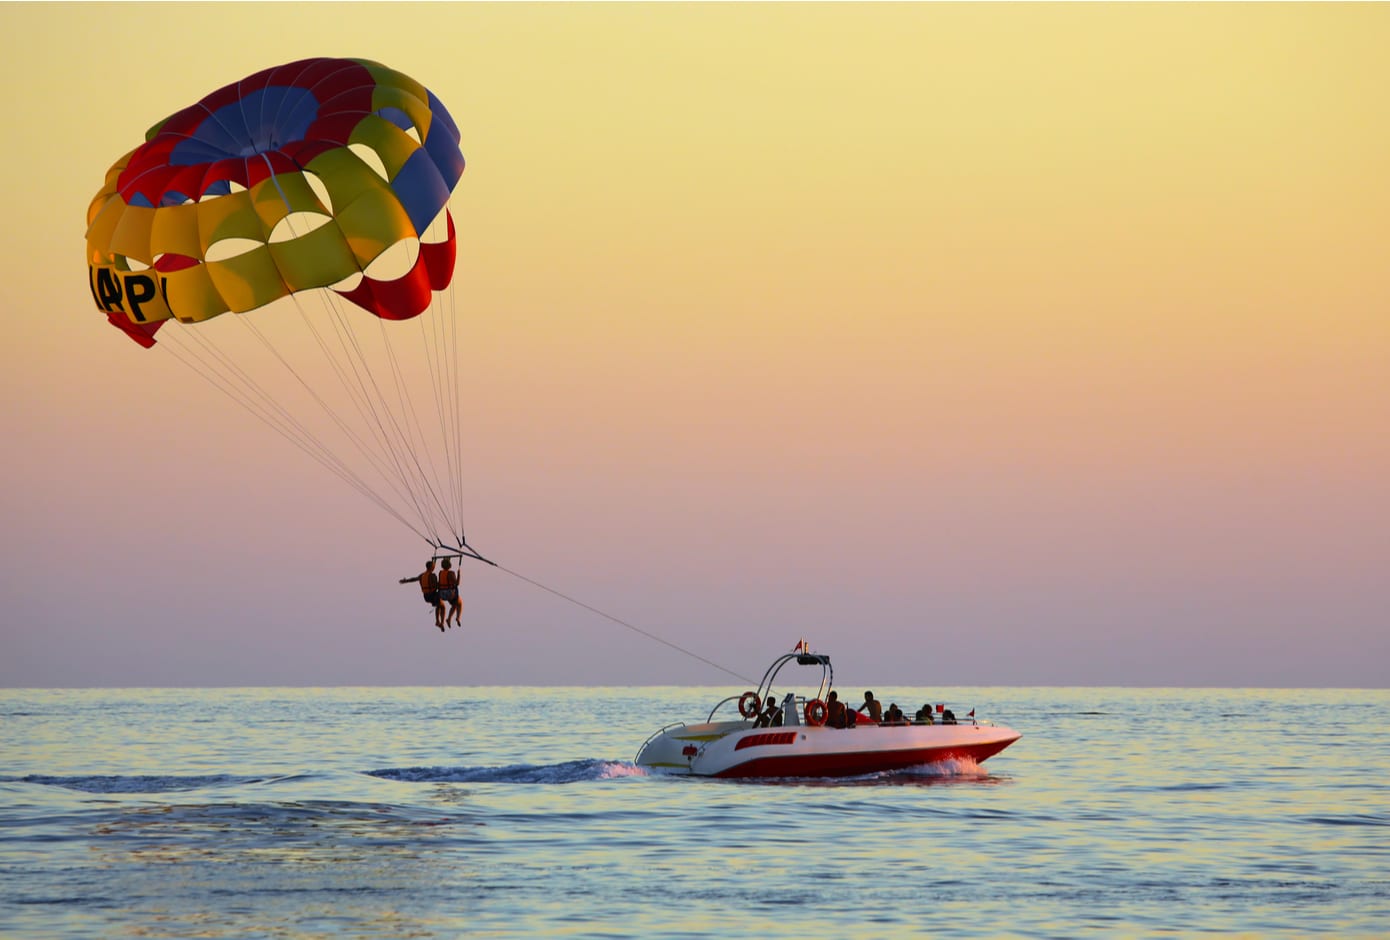 Two people parasailing above the ocean at sunset.